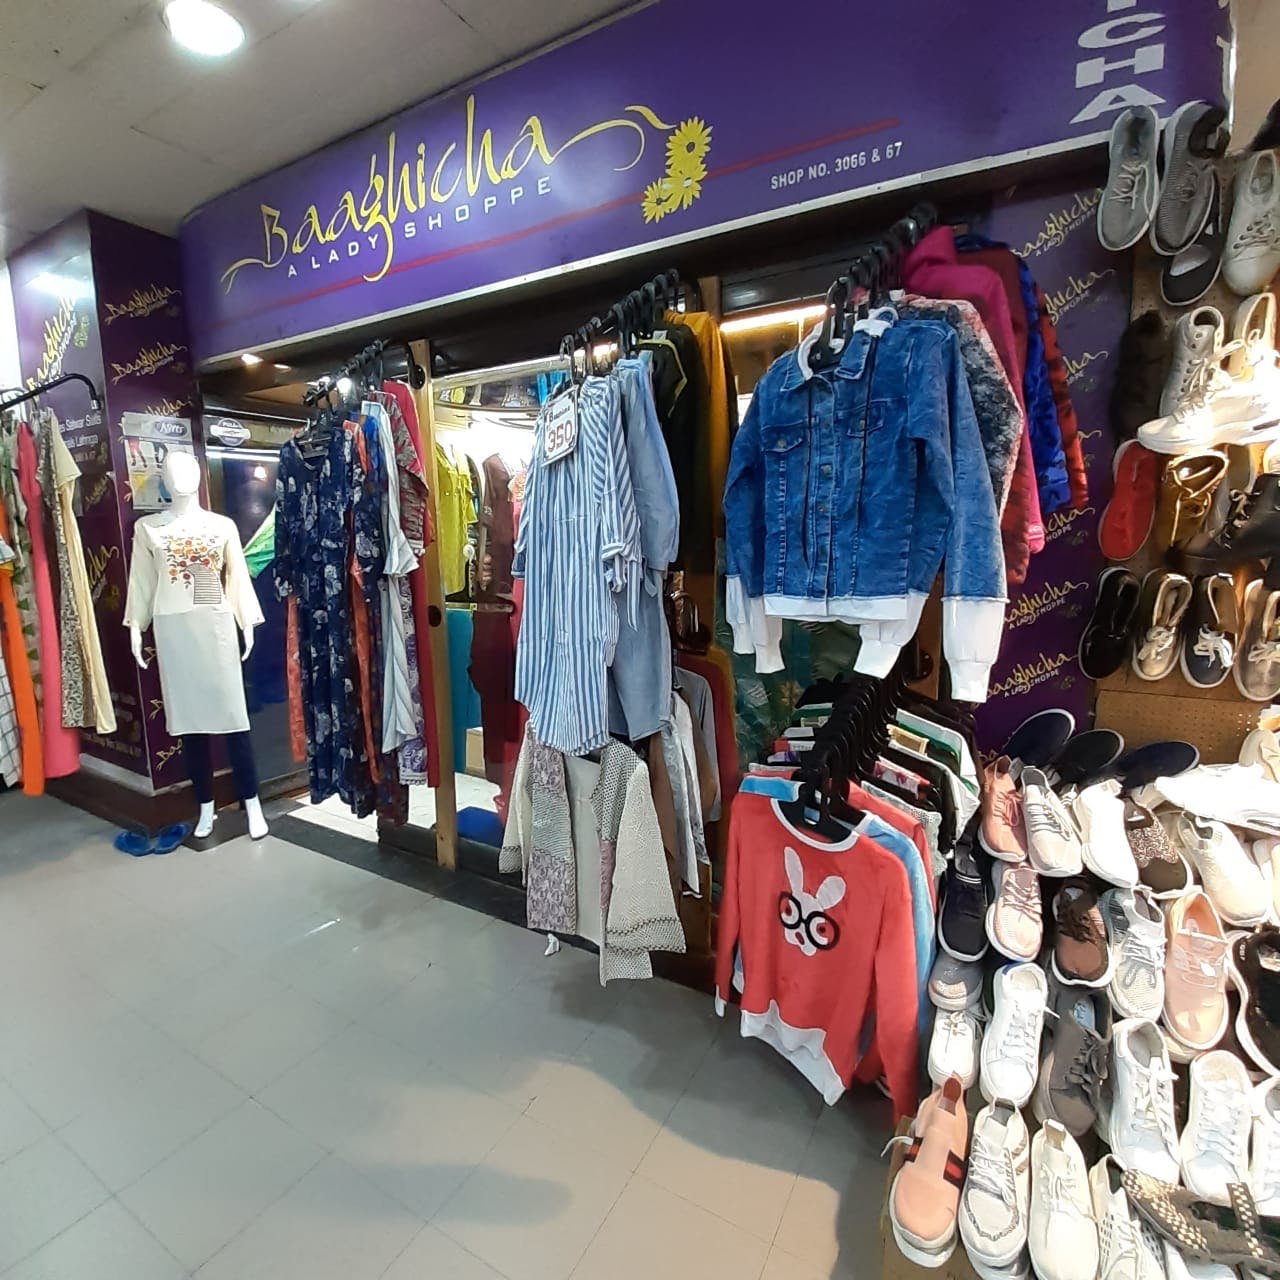 Boutique,Outlet store,Clothing,Selling,Retail,Bazaar,Shopping,Building,Footwear,Marketplace